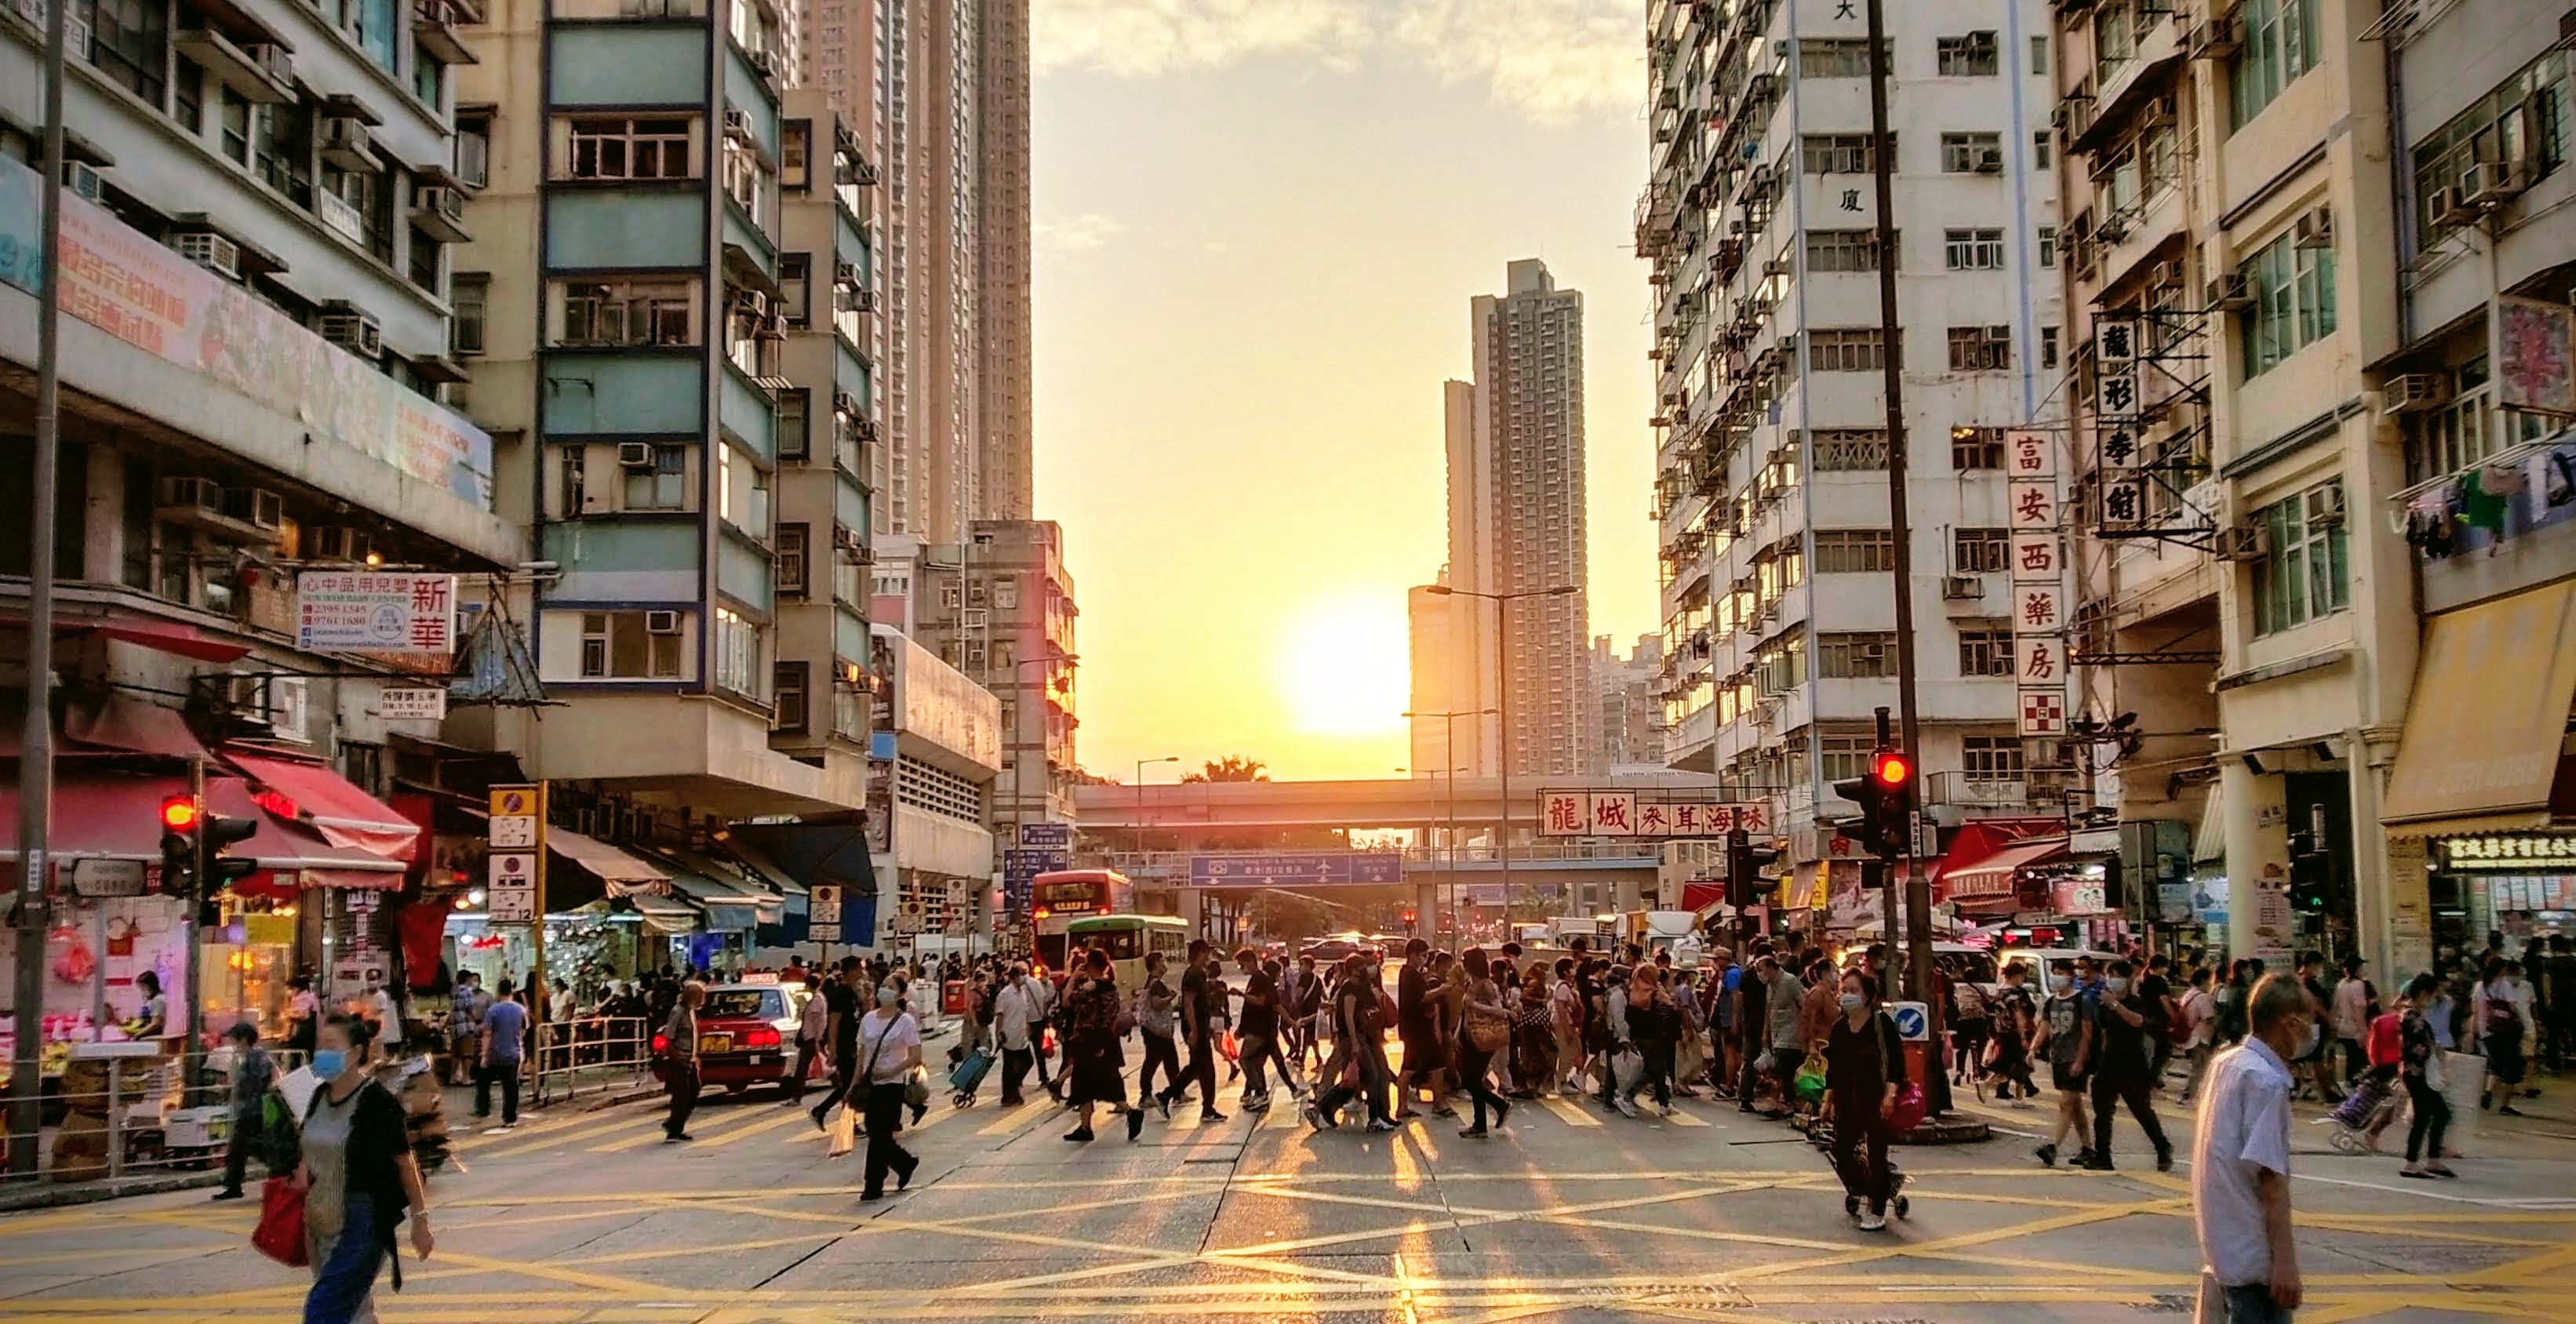 Share Frank's post about enjoying sunset in the fall in Hong Kong